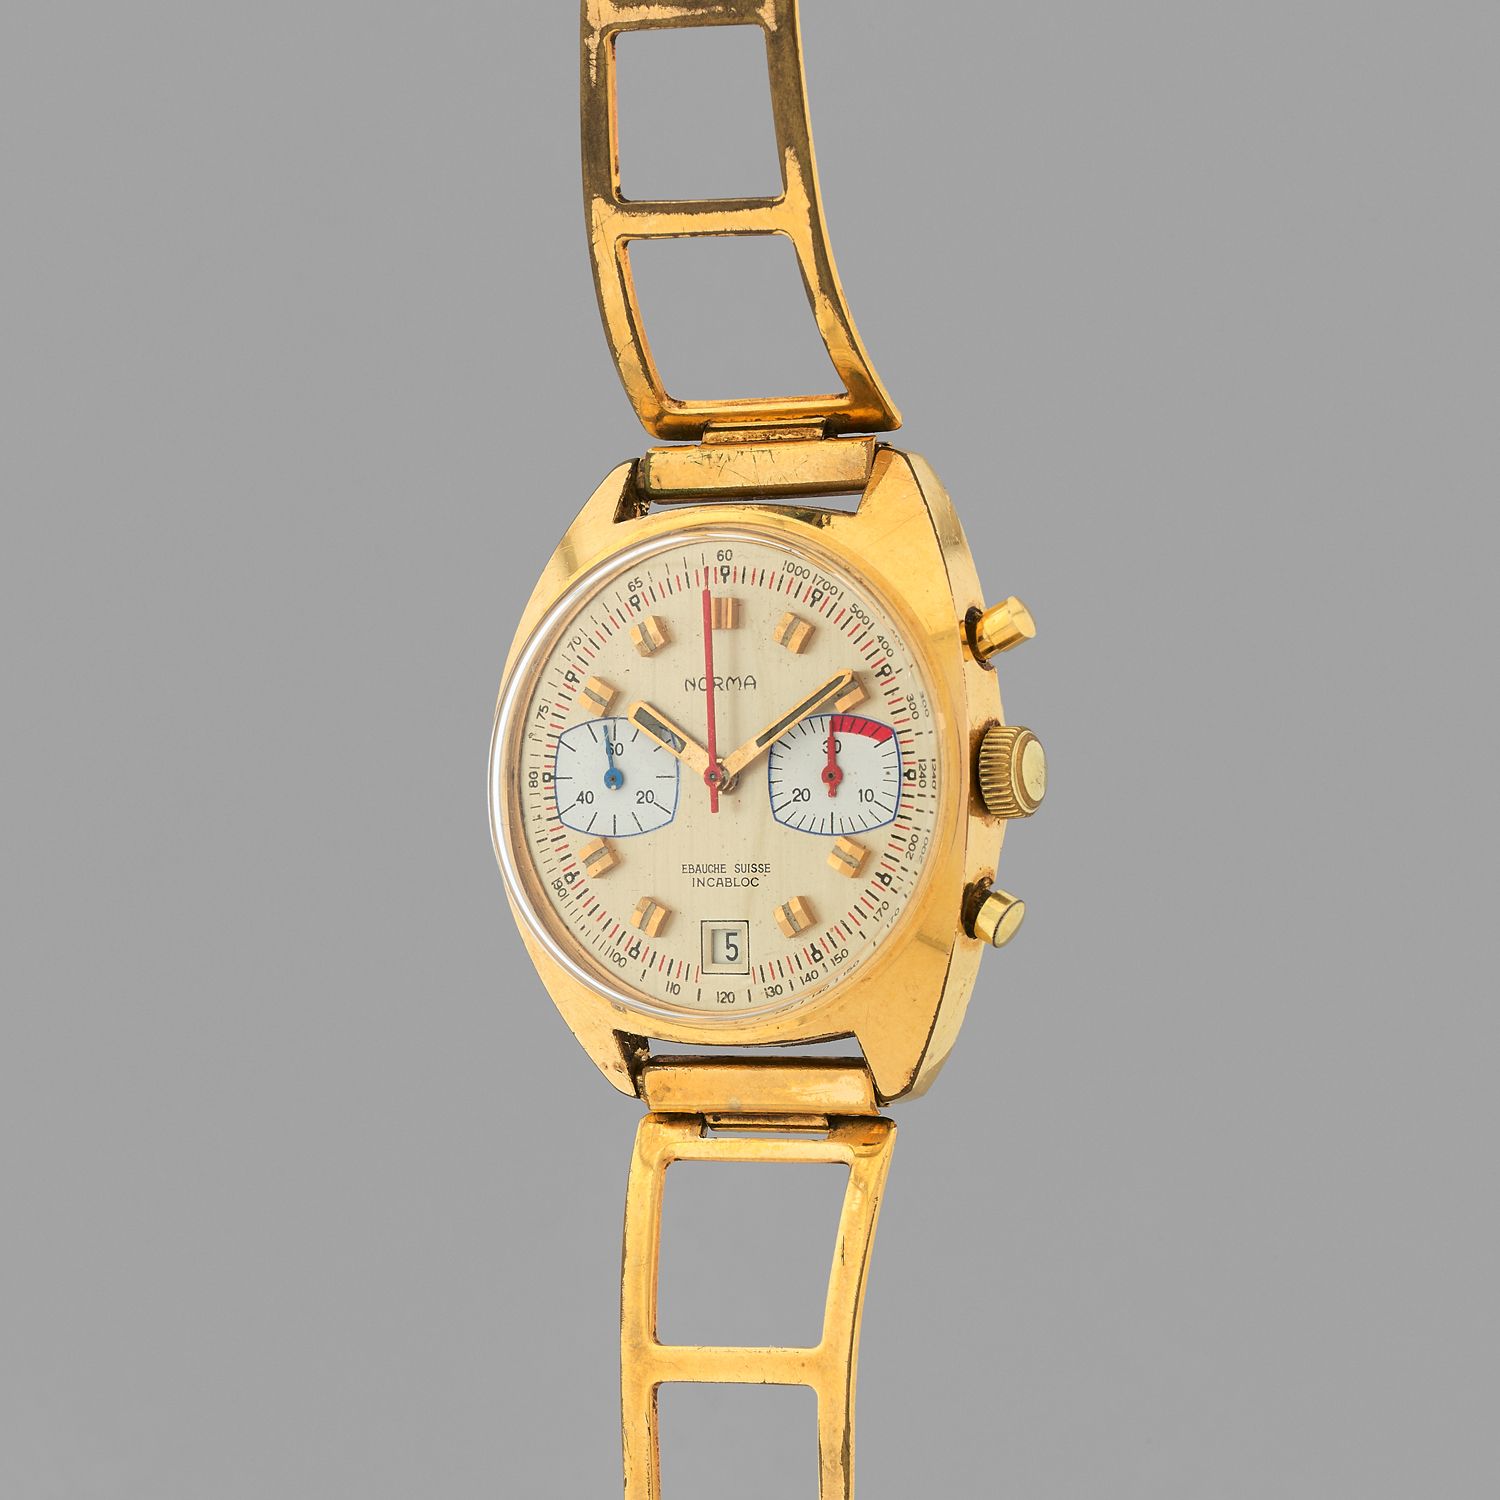 Null NORMA
Chronograph.
Circa: 1975.
Gold-plated men's chronograph on a gold-pla&hellip;